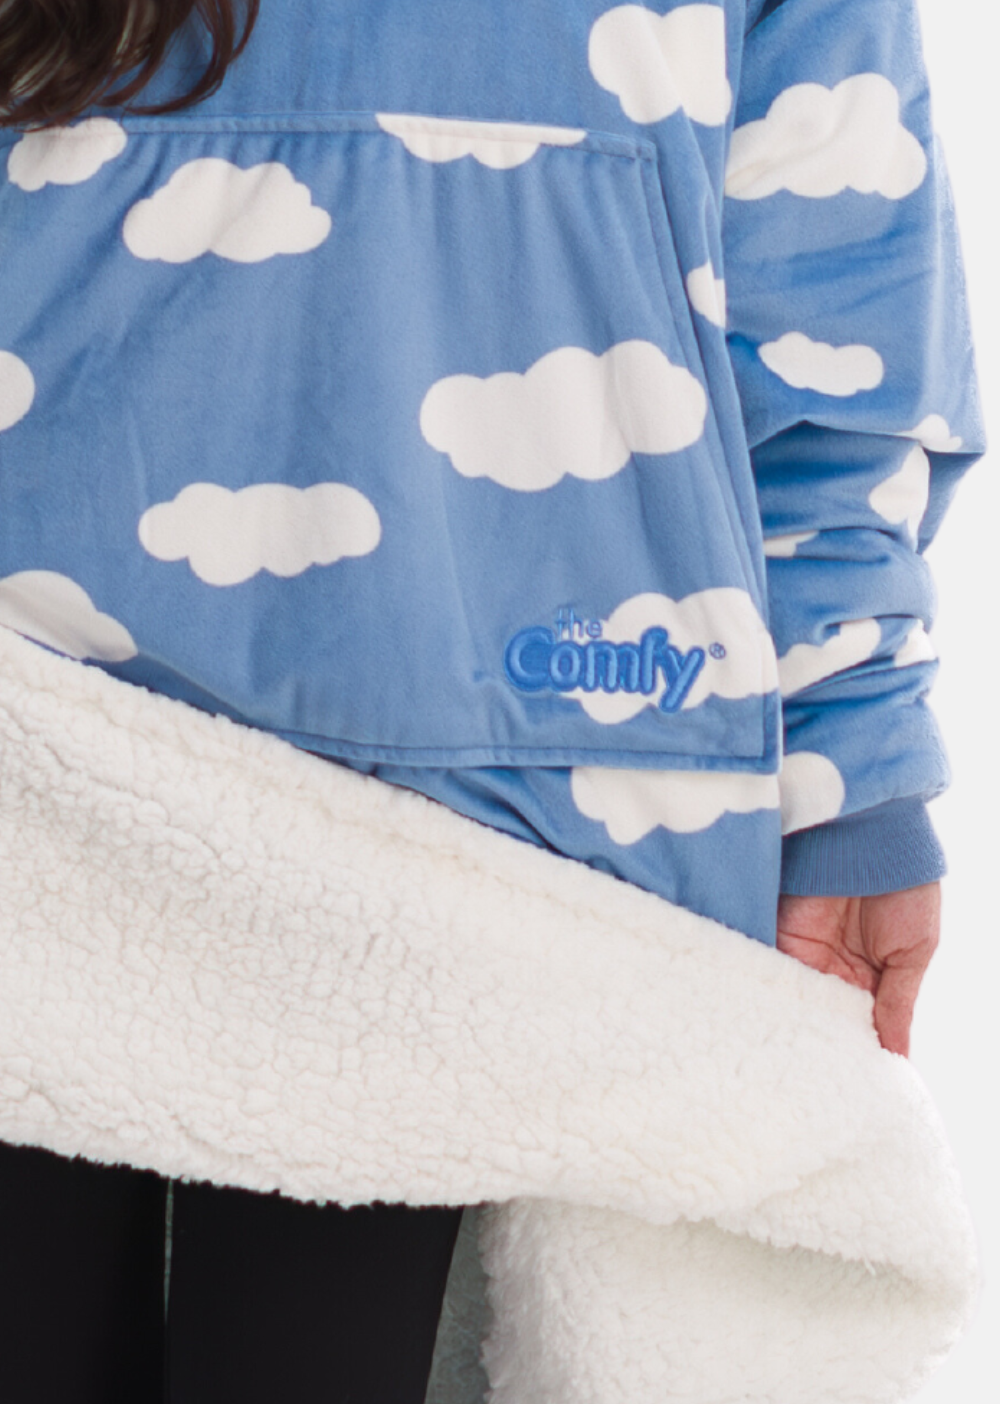 Keep yourself warm and cozy with this giant oversized wearable blanket –